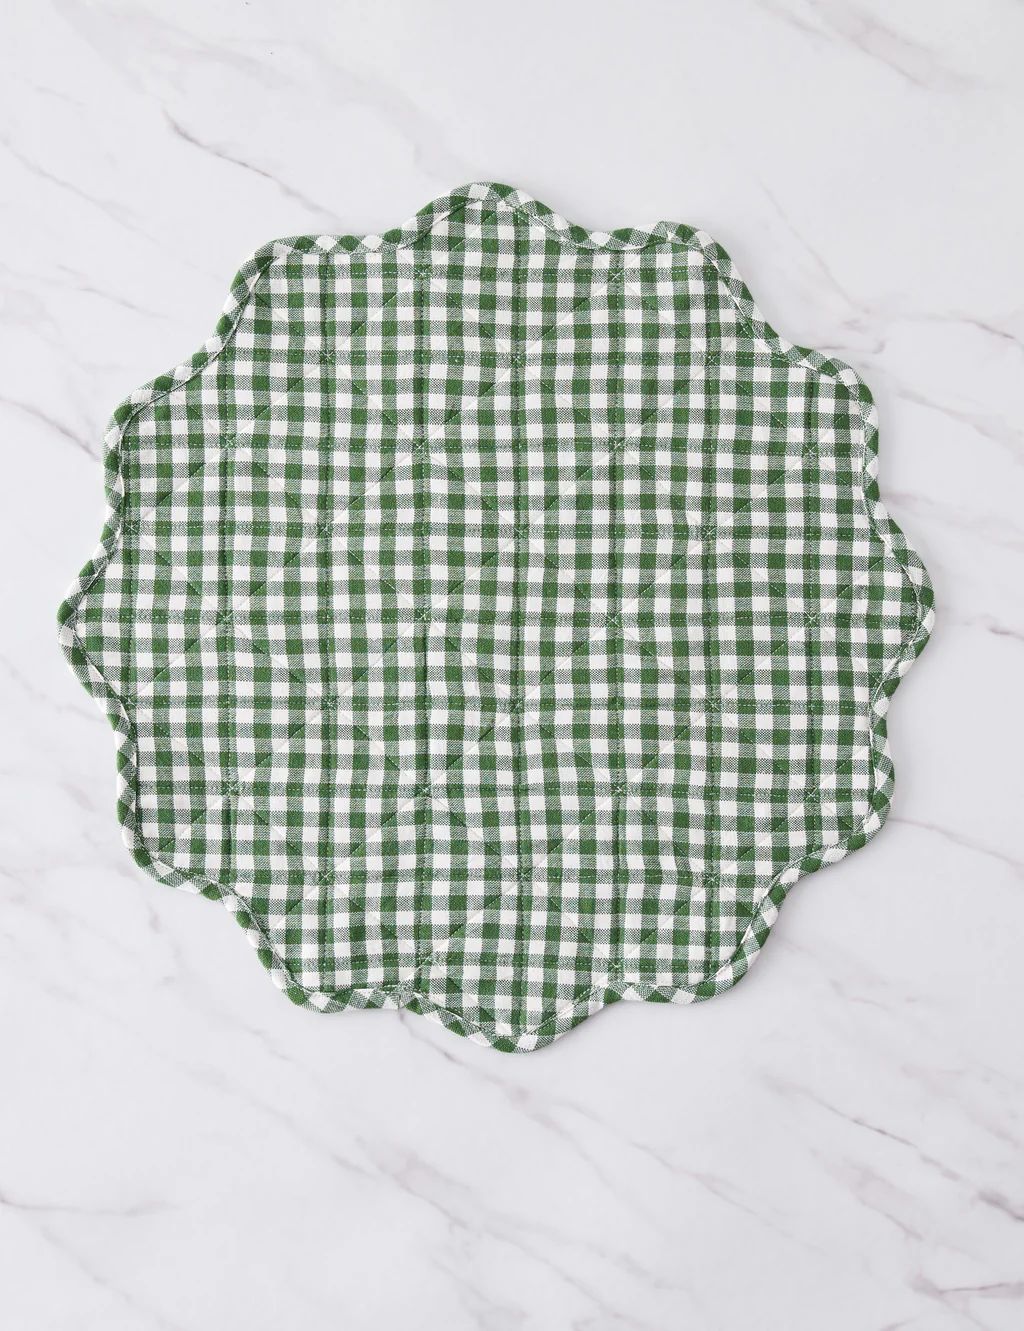 Scallop Placemat | Lulu and Georgia 